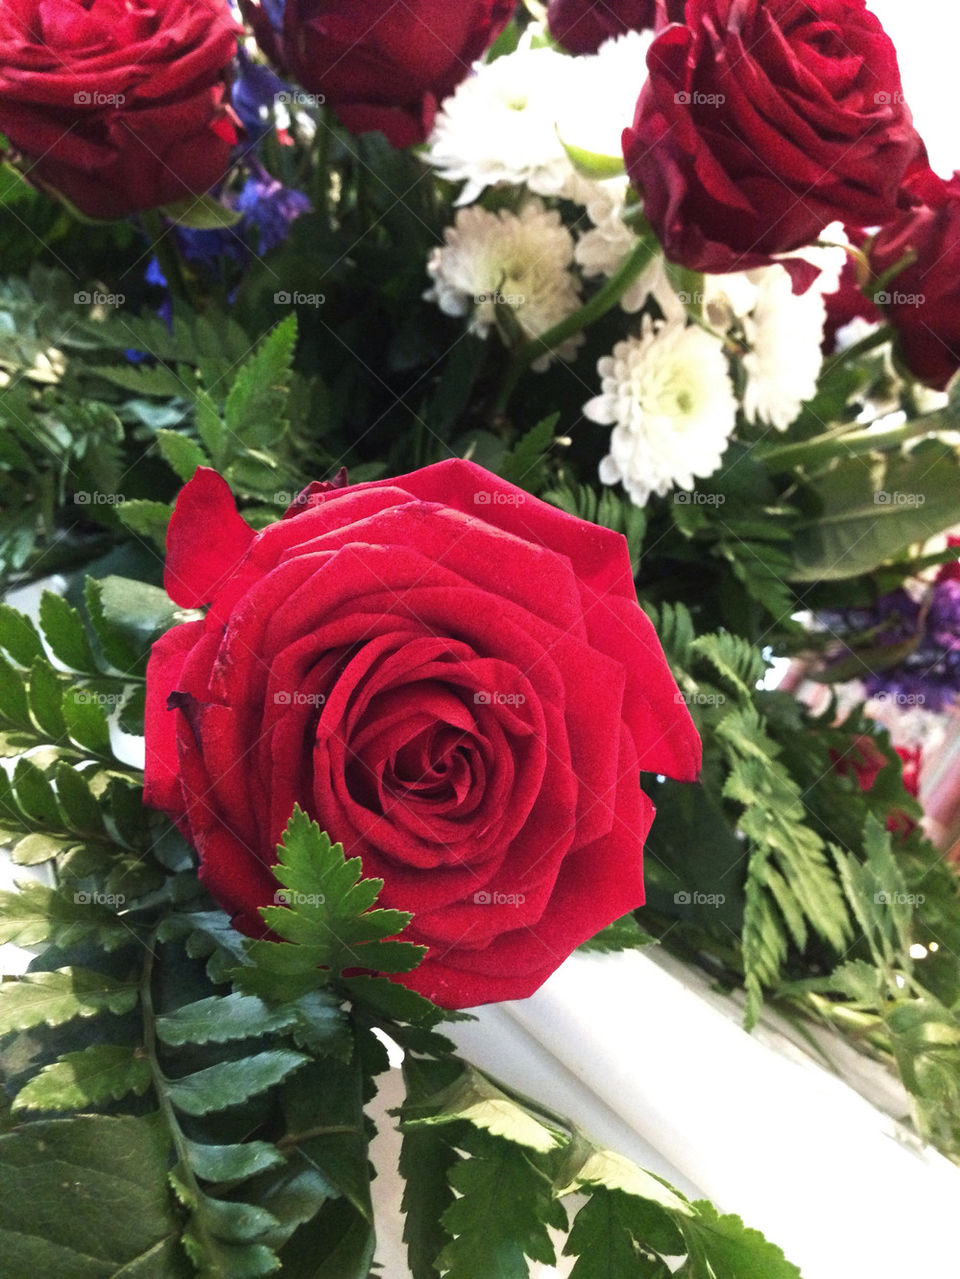 Some beautiful roses from a funeral